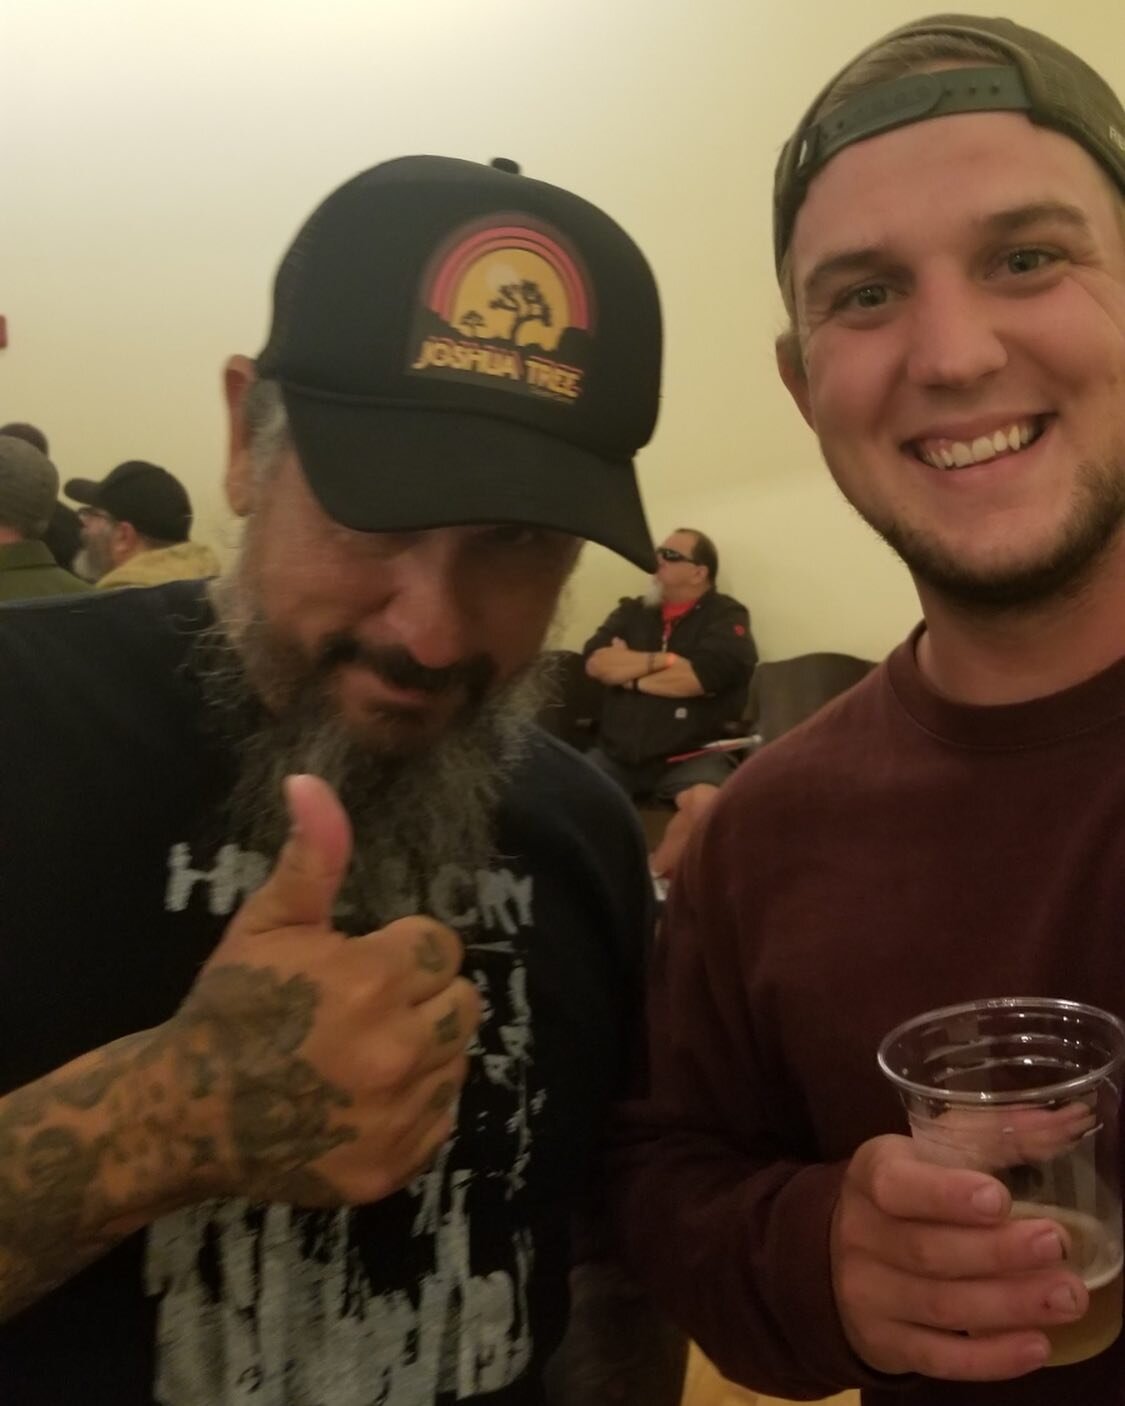 It&rsquo;s easy to find the cool people when they are wearing our gear.  This Coyote Corner hat was spotted at the Subhumans show! #subhumans #joshuatree @caldercrisis = #bestauntever